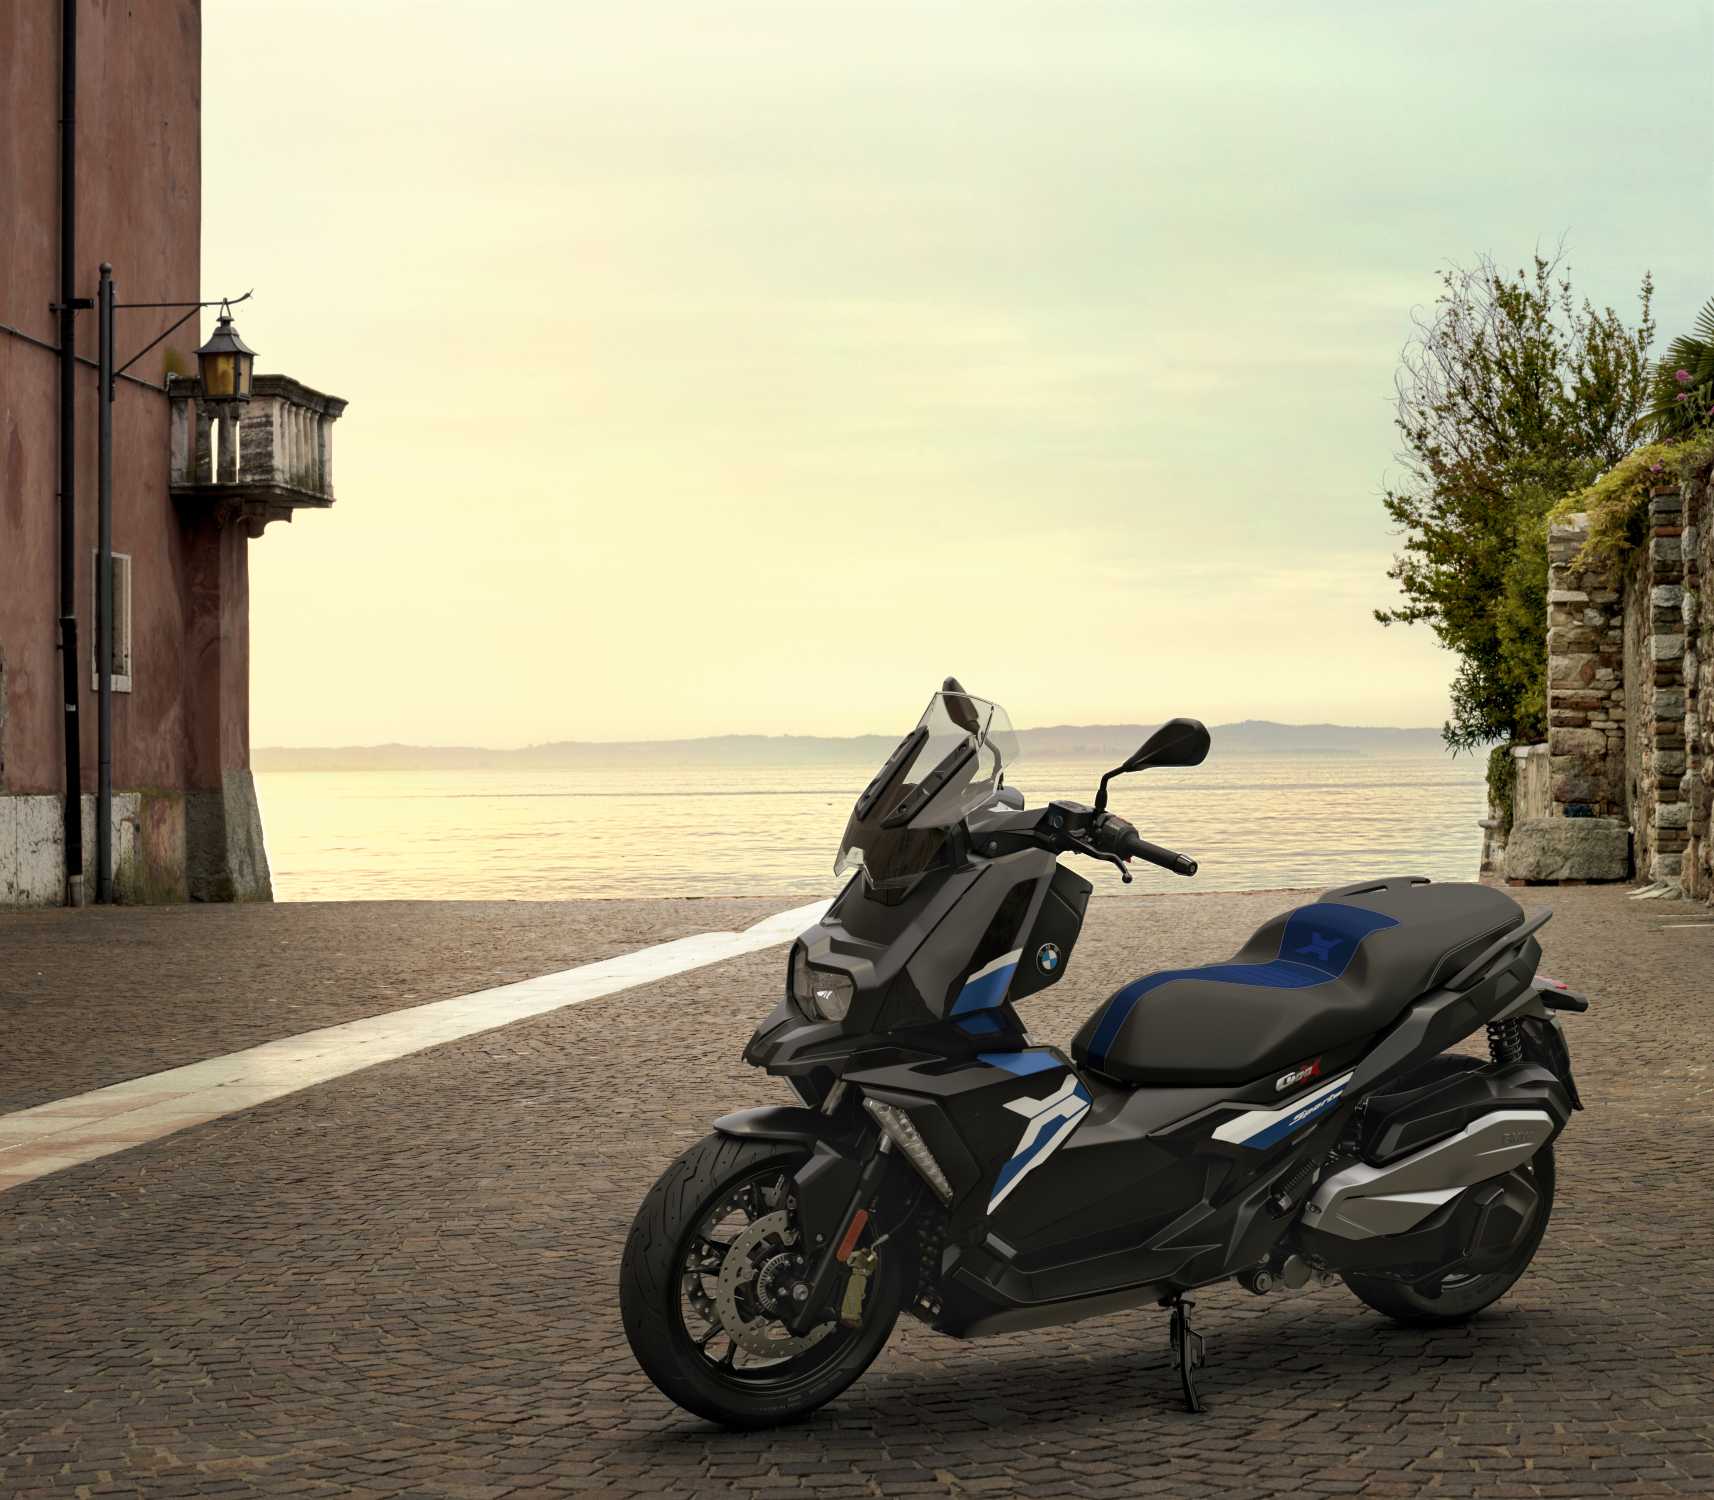 BMW Motorrad presents the new BMW C 400 X and C 400 GT.